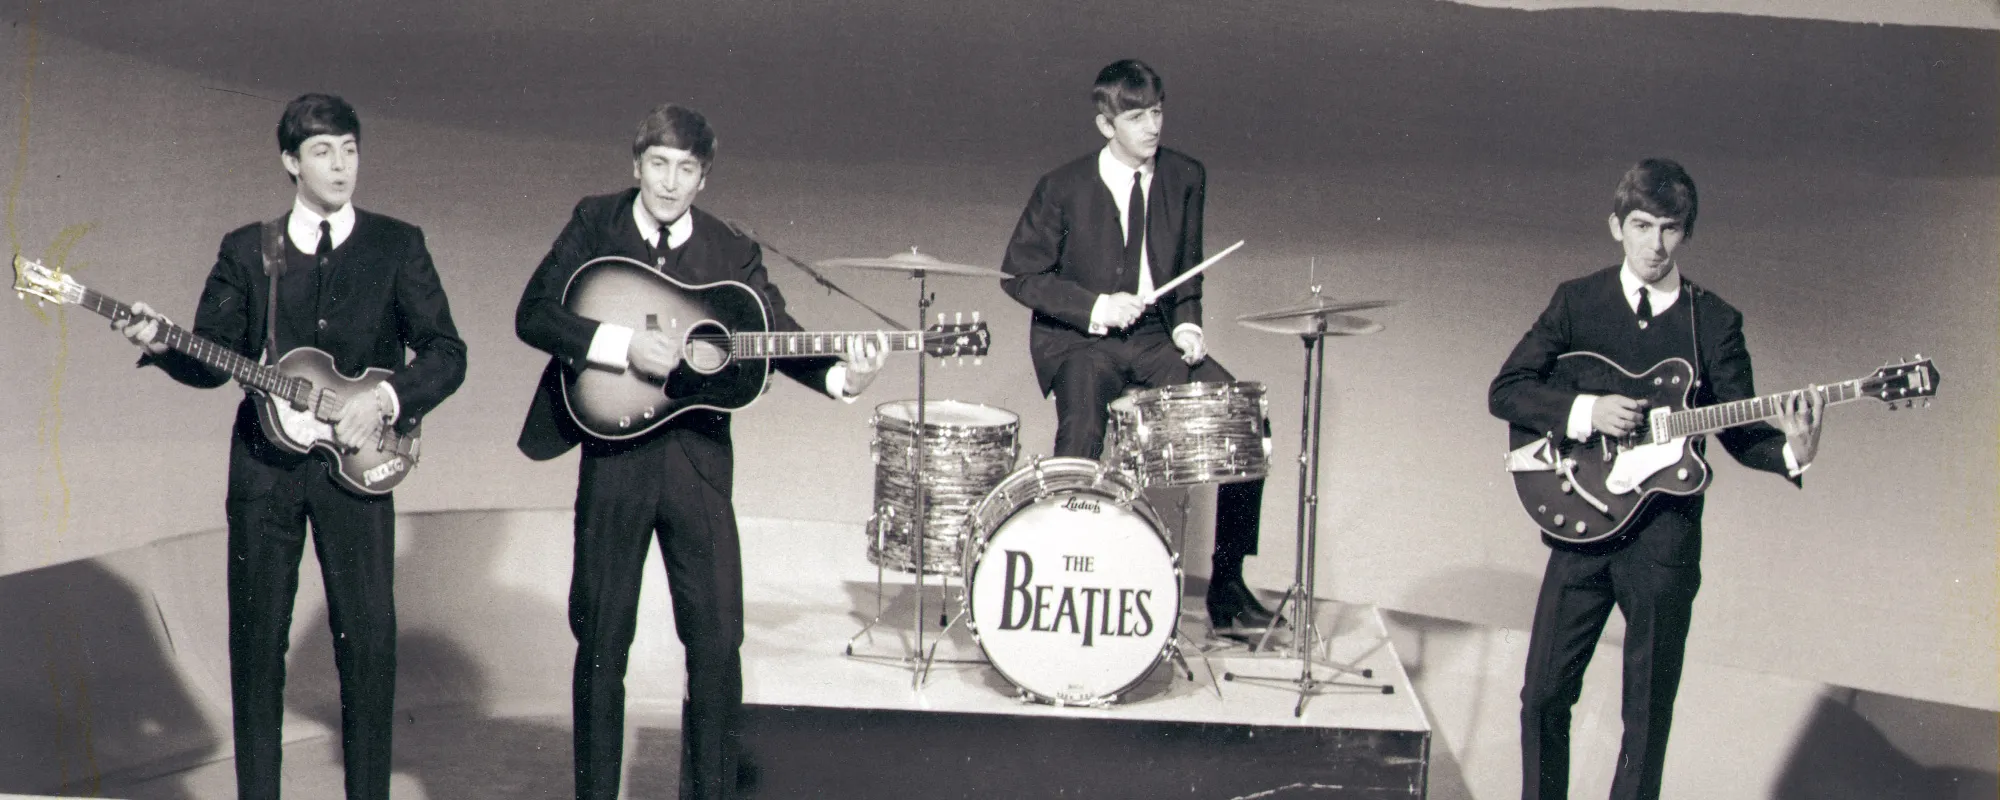 Watch Documentary About New Beatles Song, “Now and Then,” Featuring a Clip of the Tune